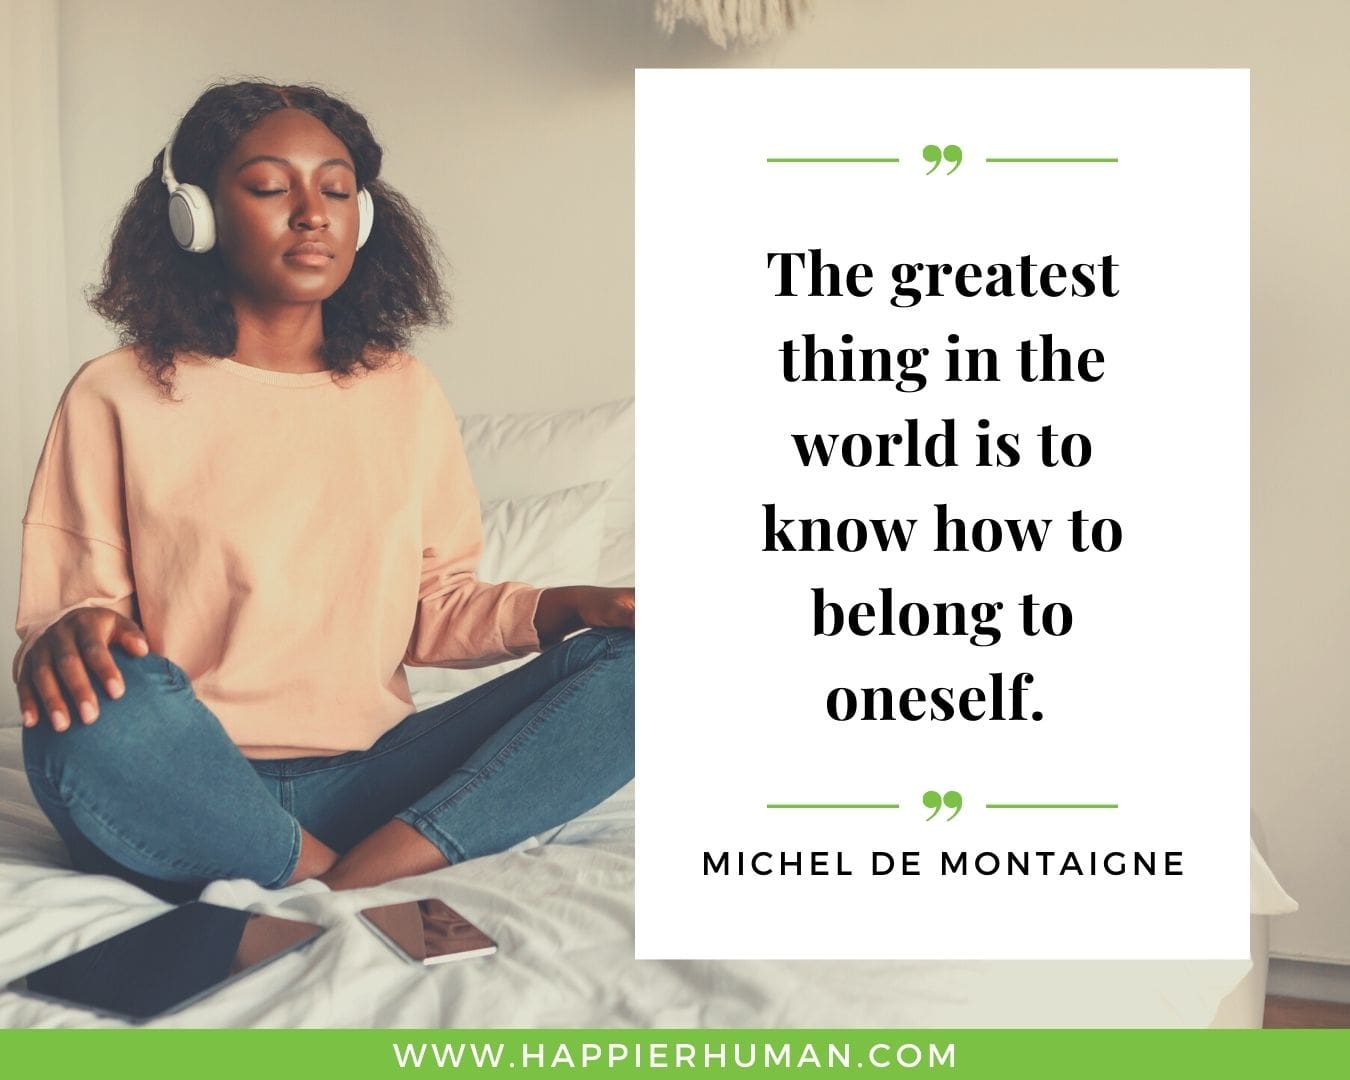 Loneliness Quotes - “The greatest thing in the world is to know how to belong to oneself.” – Michel de Montaigne